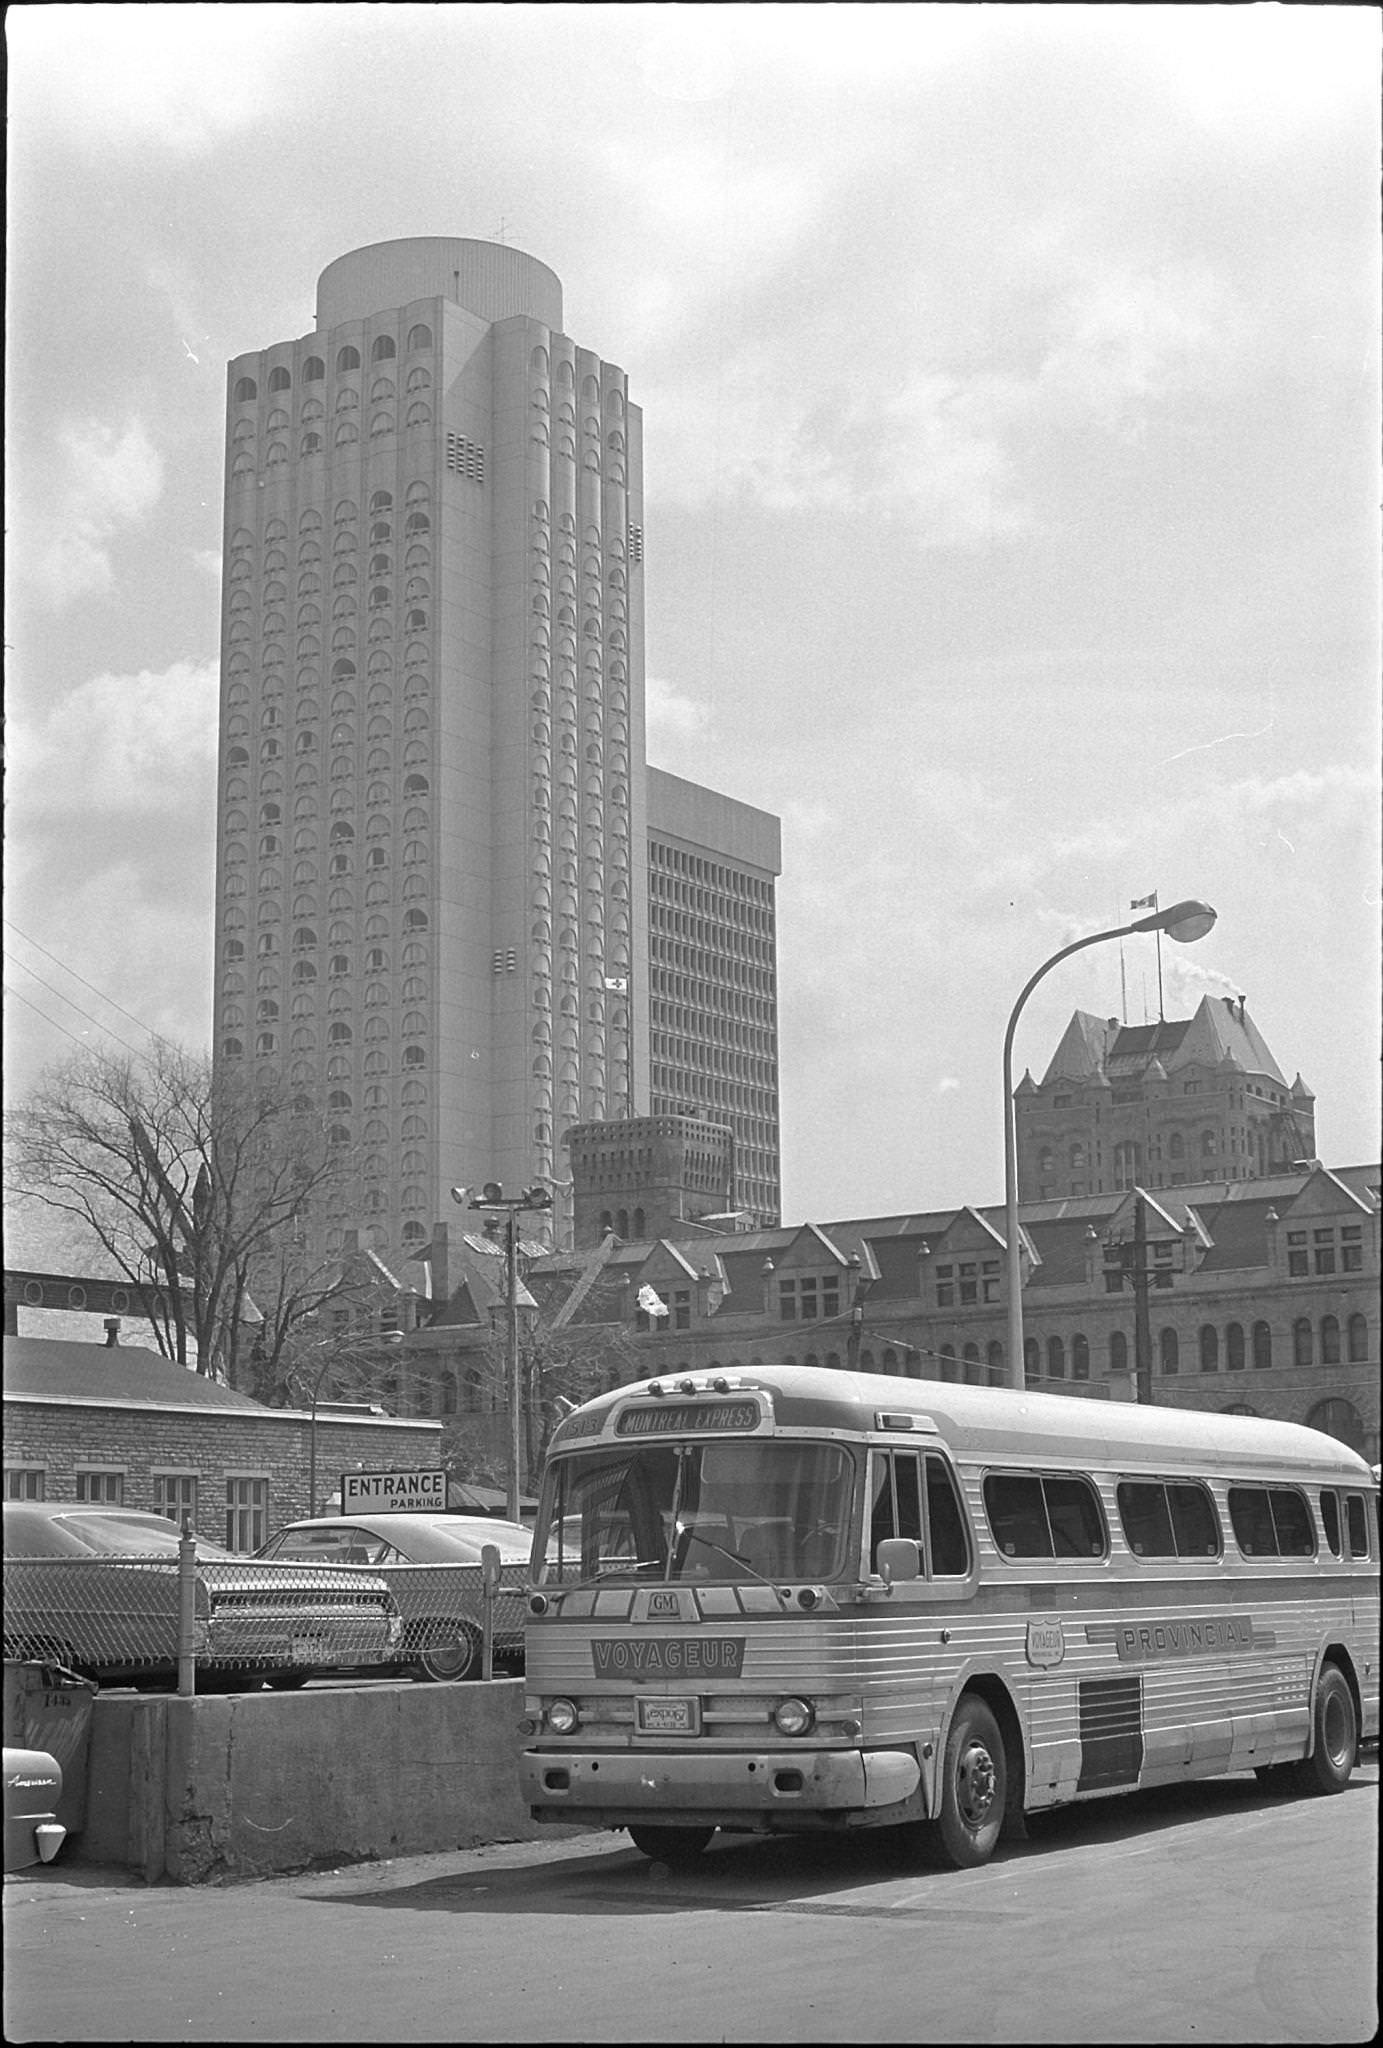 Montreal during the Expo 1967